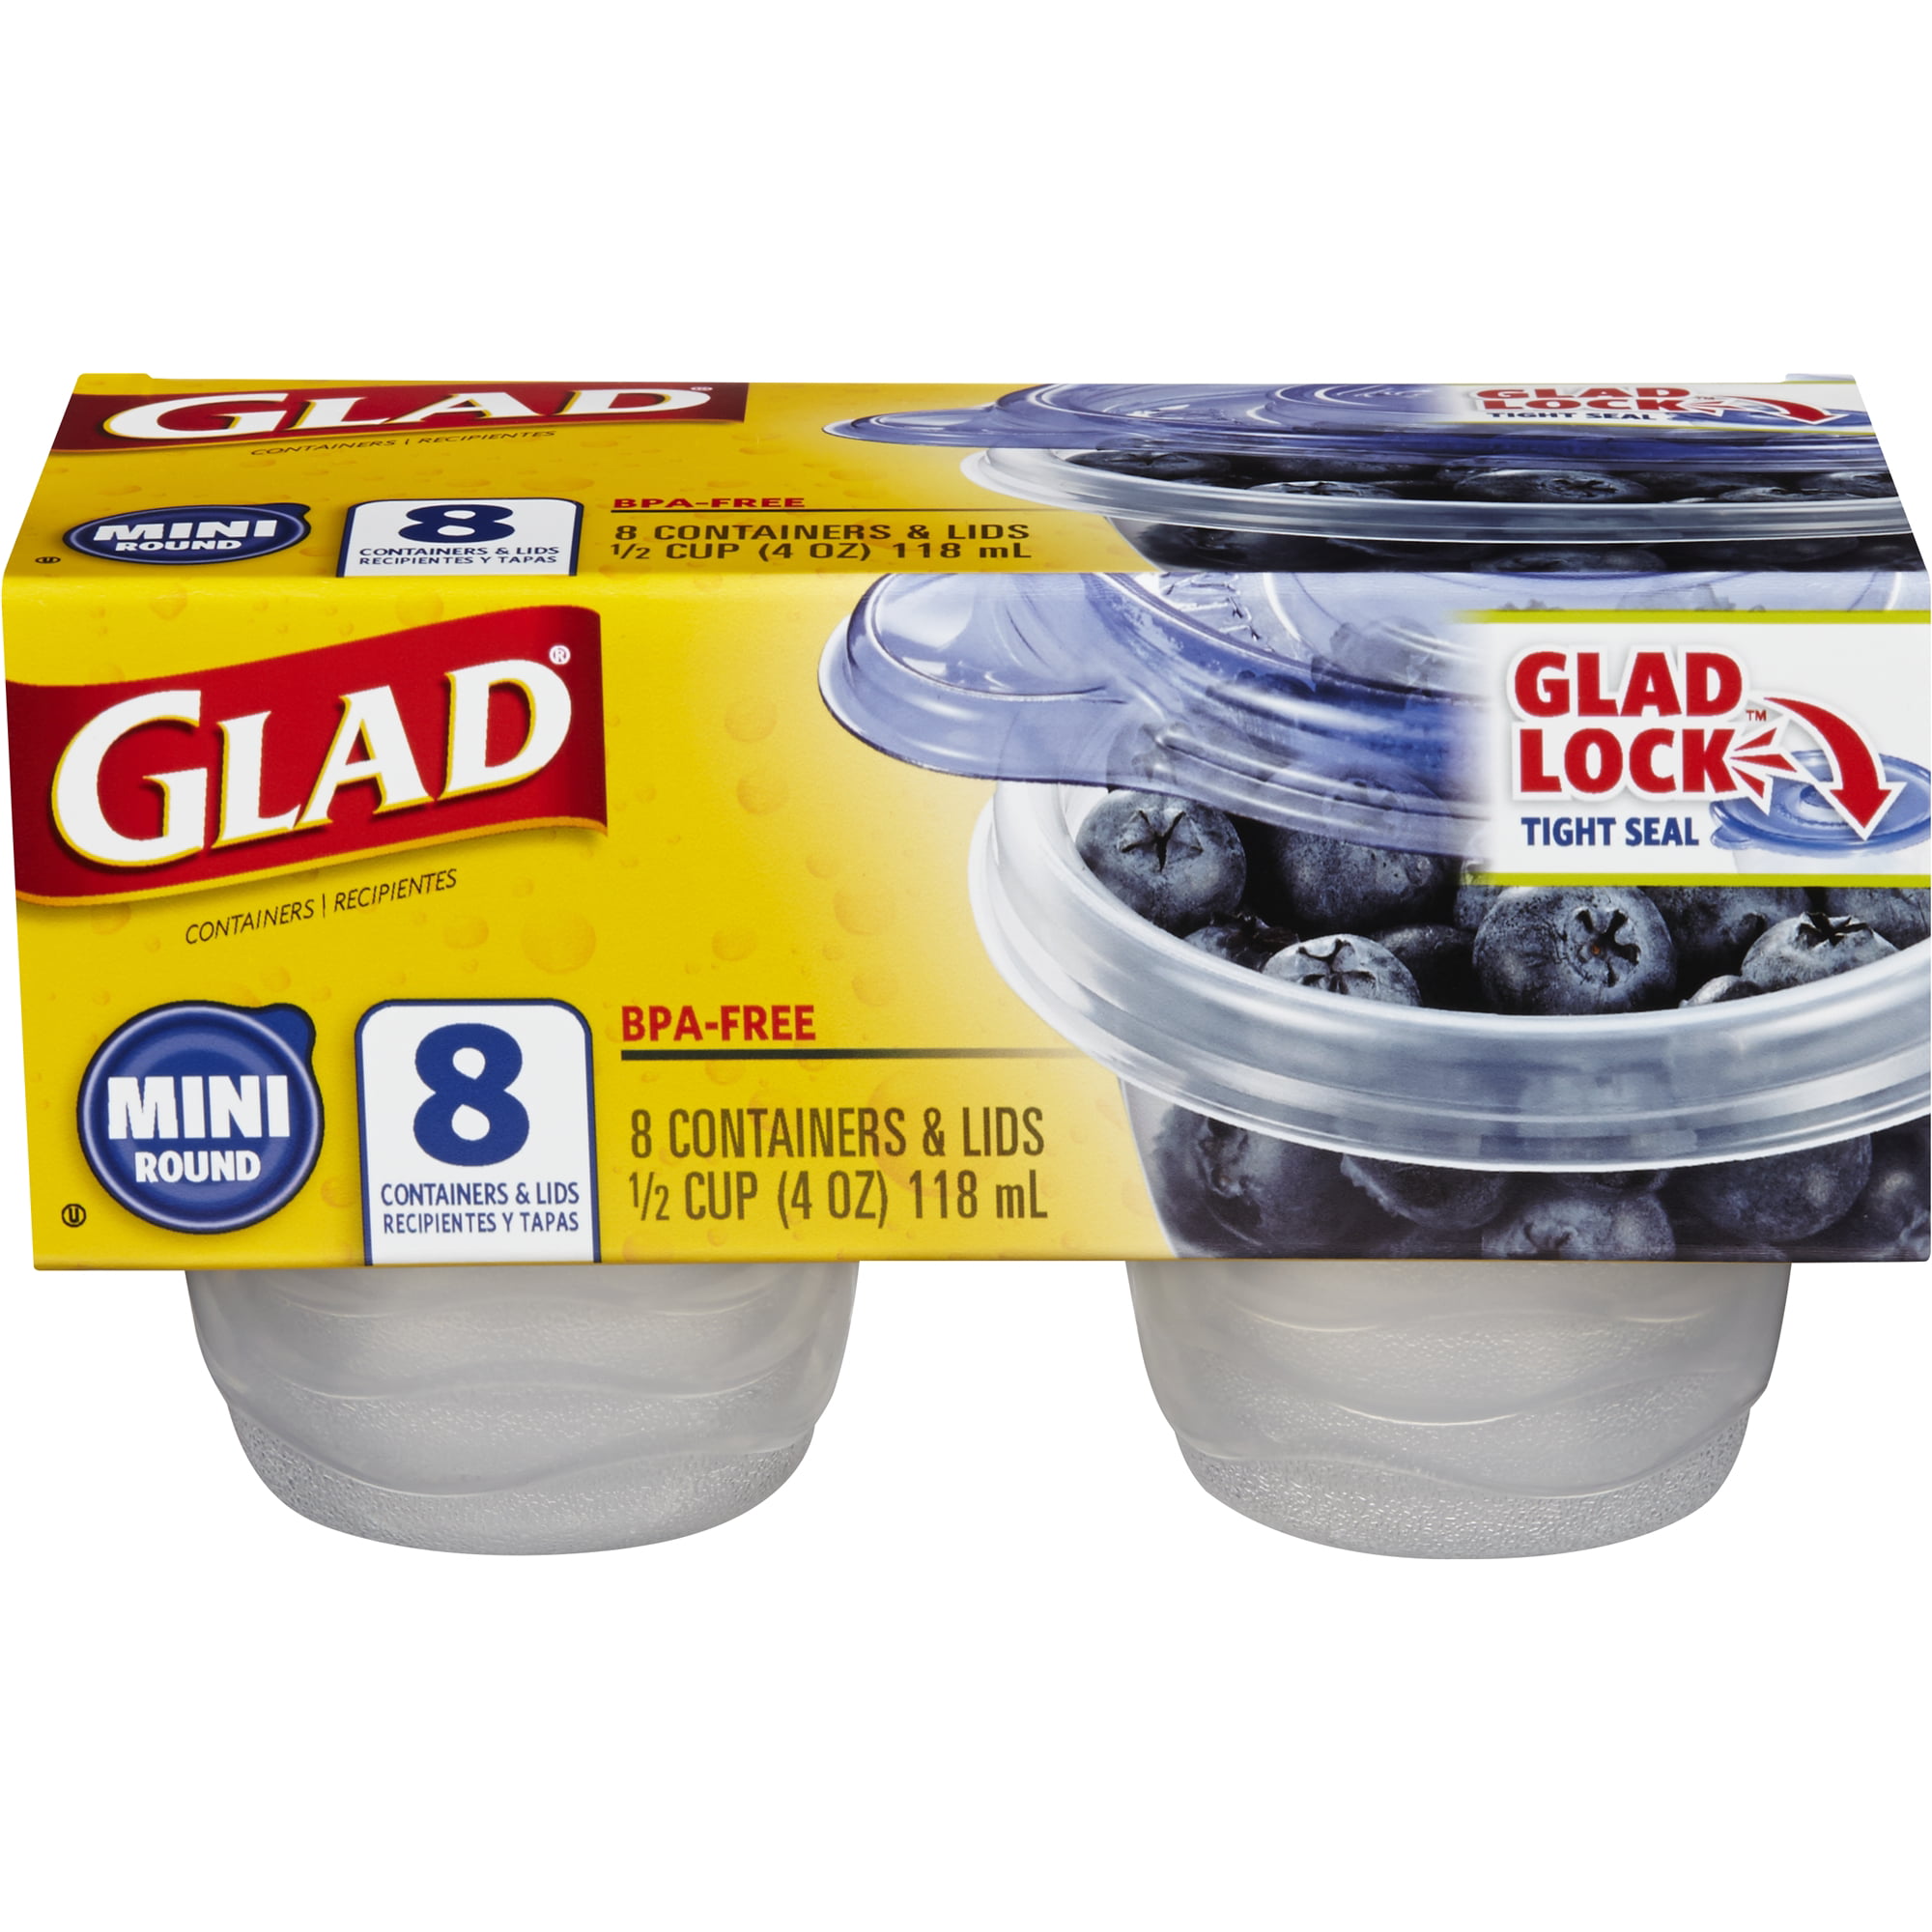 2 Packs Glad Lock Tight Seal 1/2 Cup BPA Free Mini Round 8 Ct Containers & Lids 